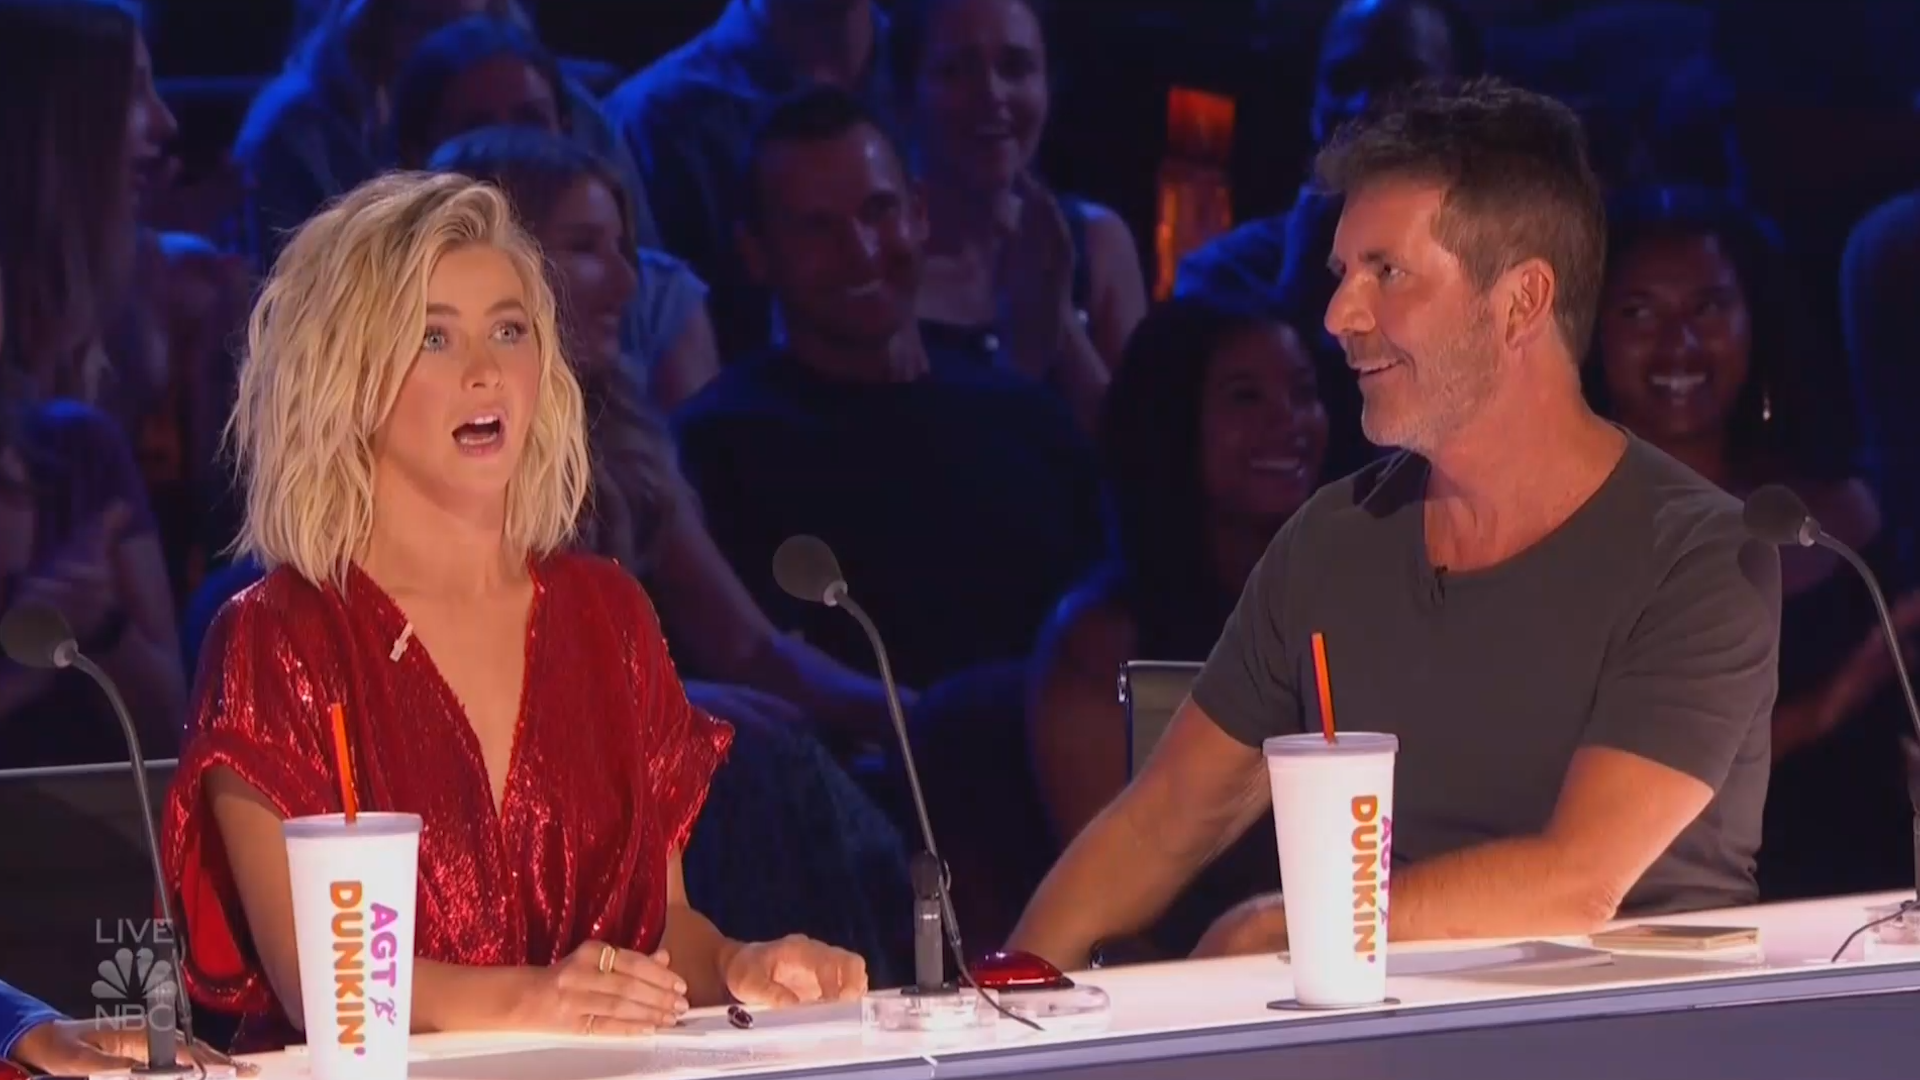 Simon Cowell on terrible ‘AGT’ performance: ‘It was like watching a murder’